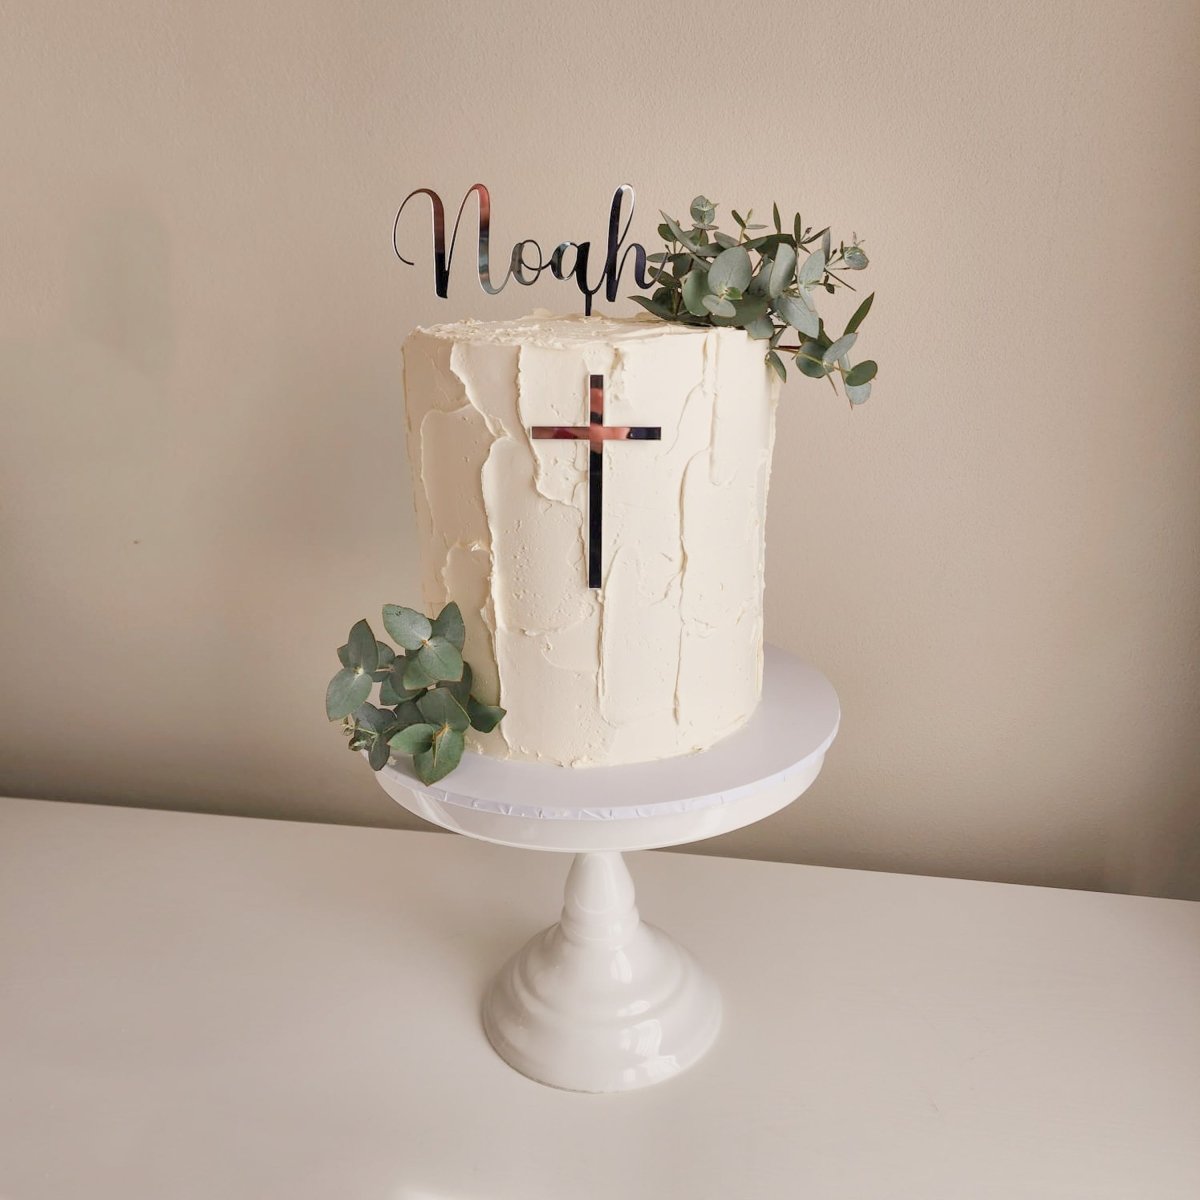 Christening Name with Cross - Cake Topper | POSH TOPPERS